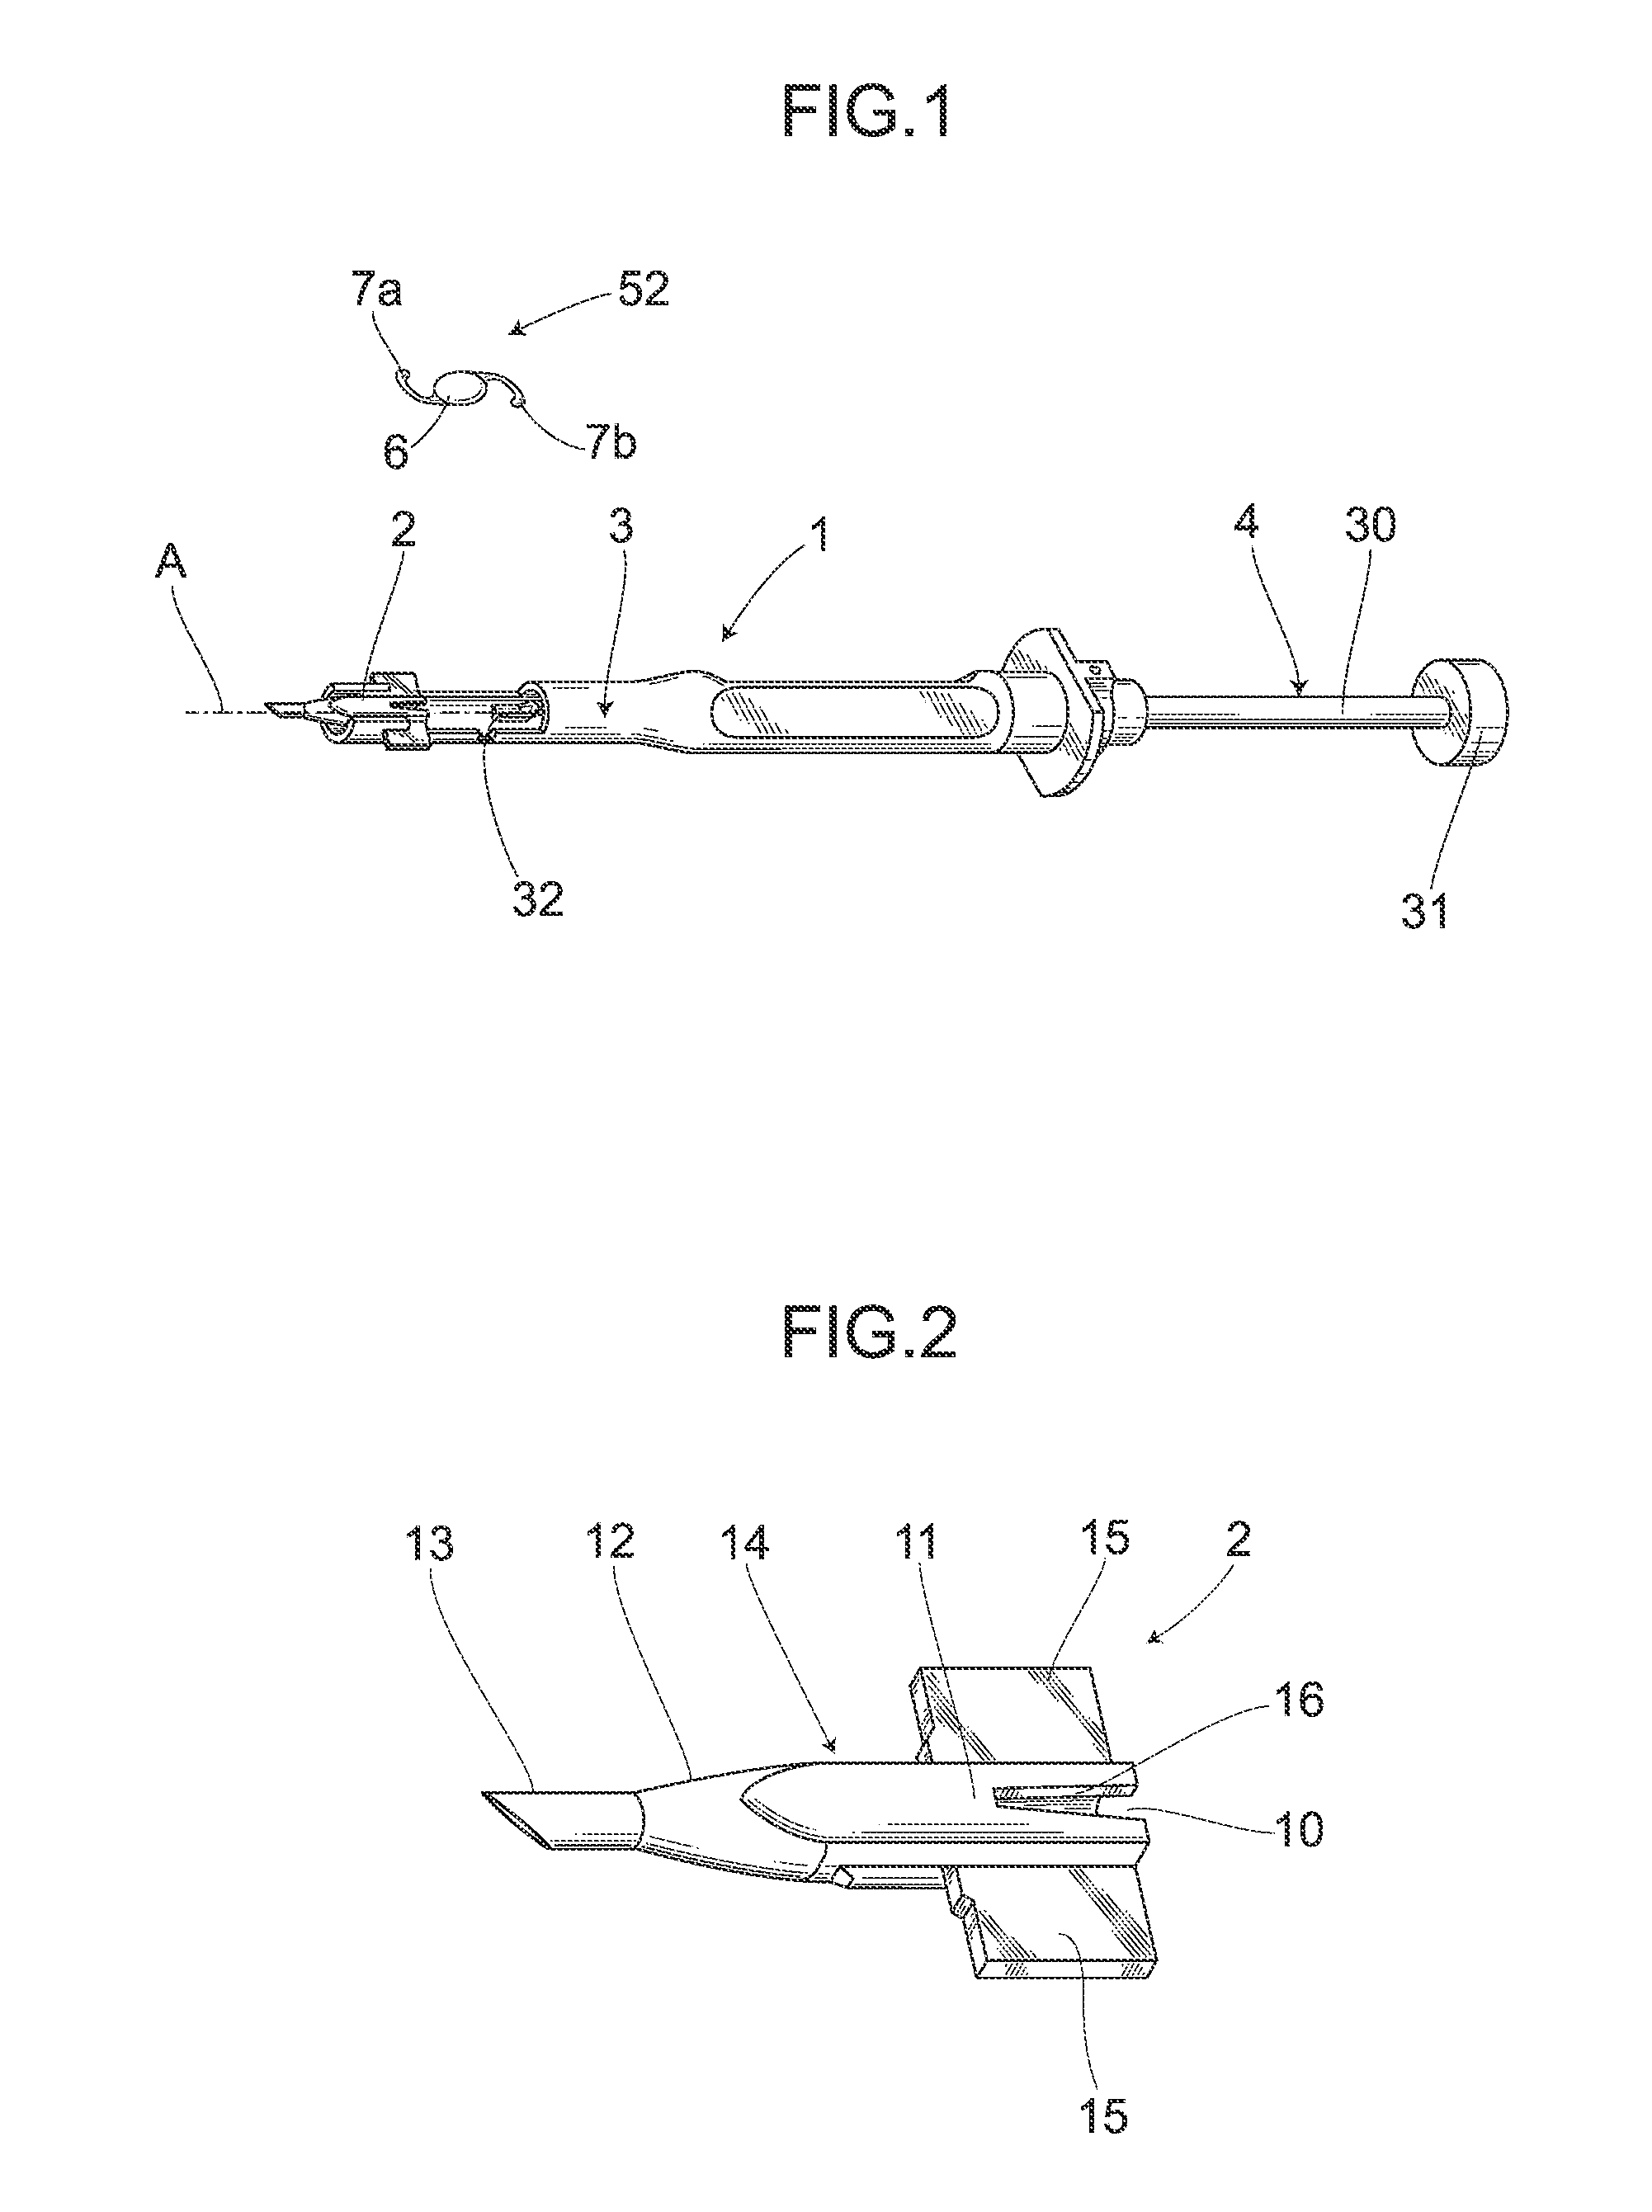 Intraocular lens insertion device and method for controlling movement of the intraocular lens